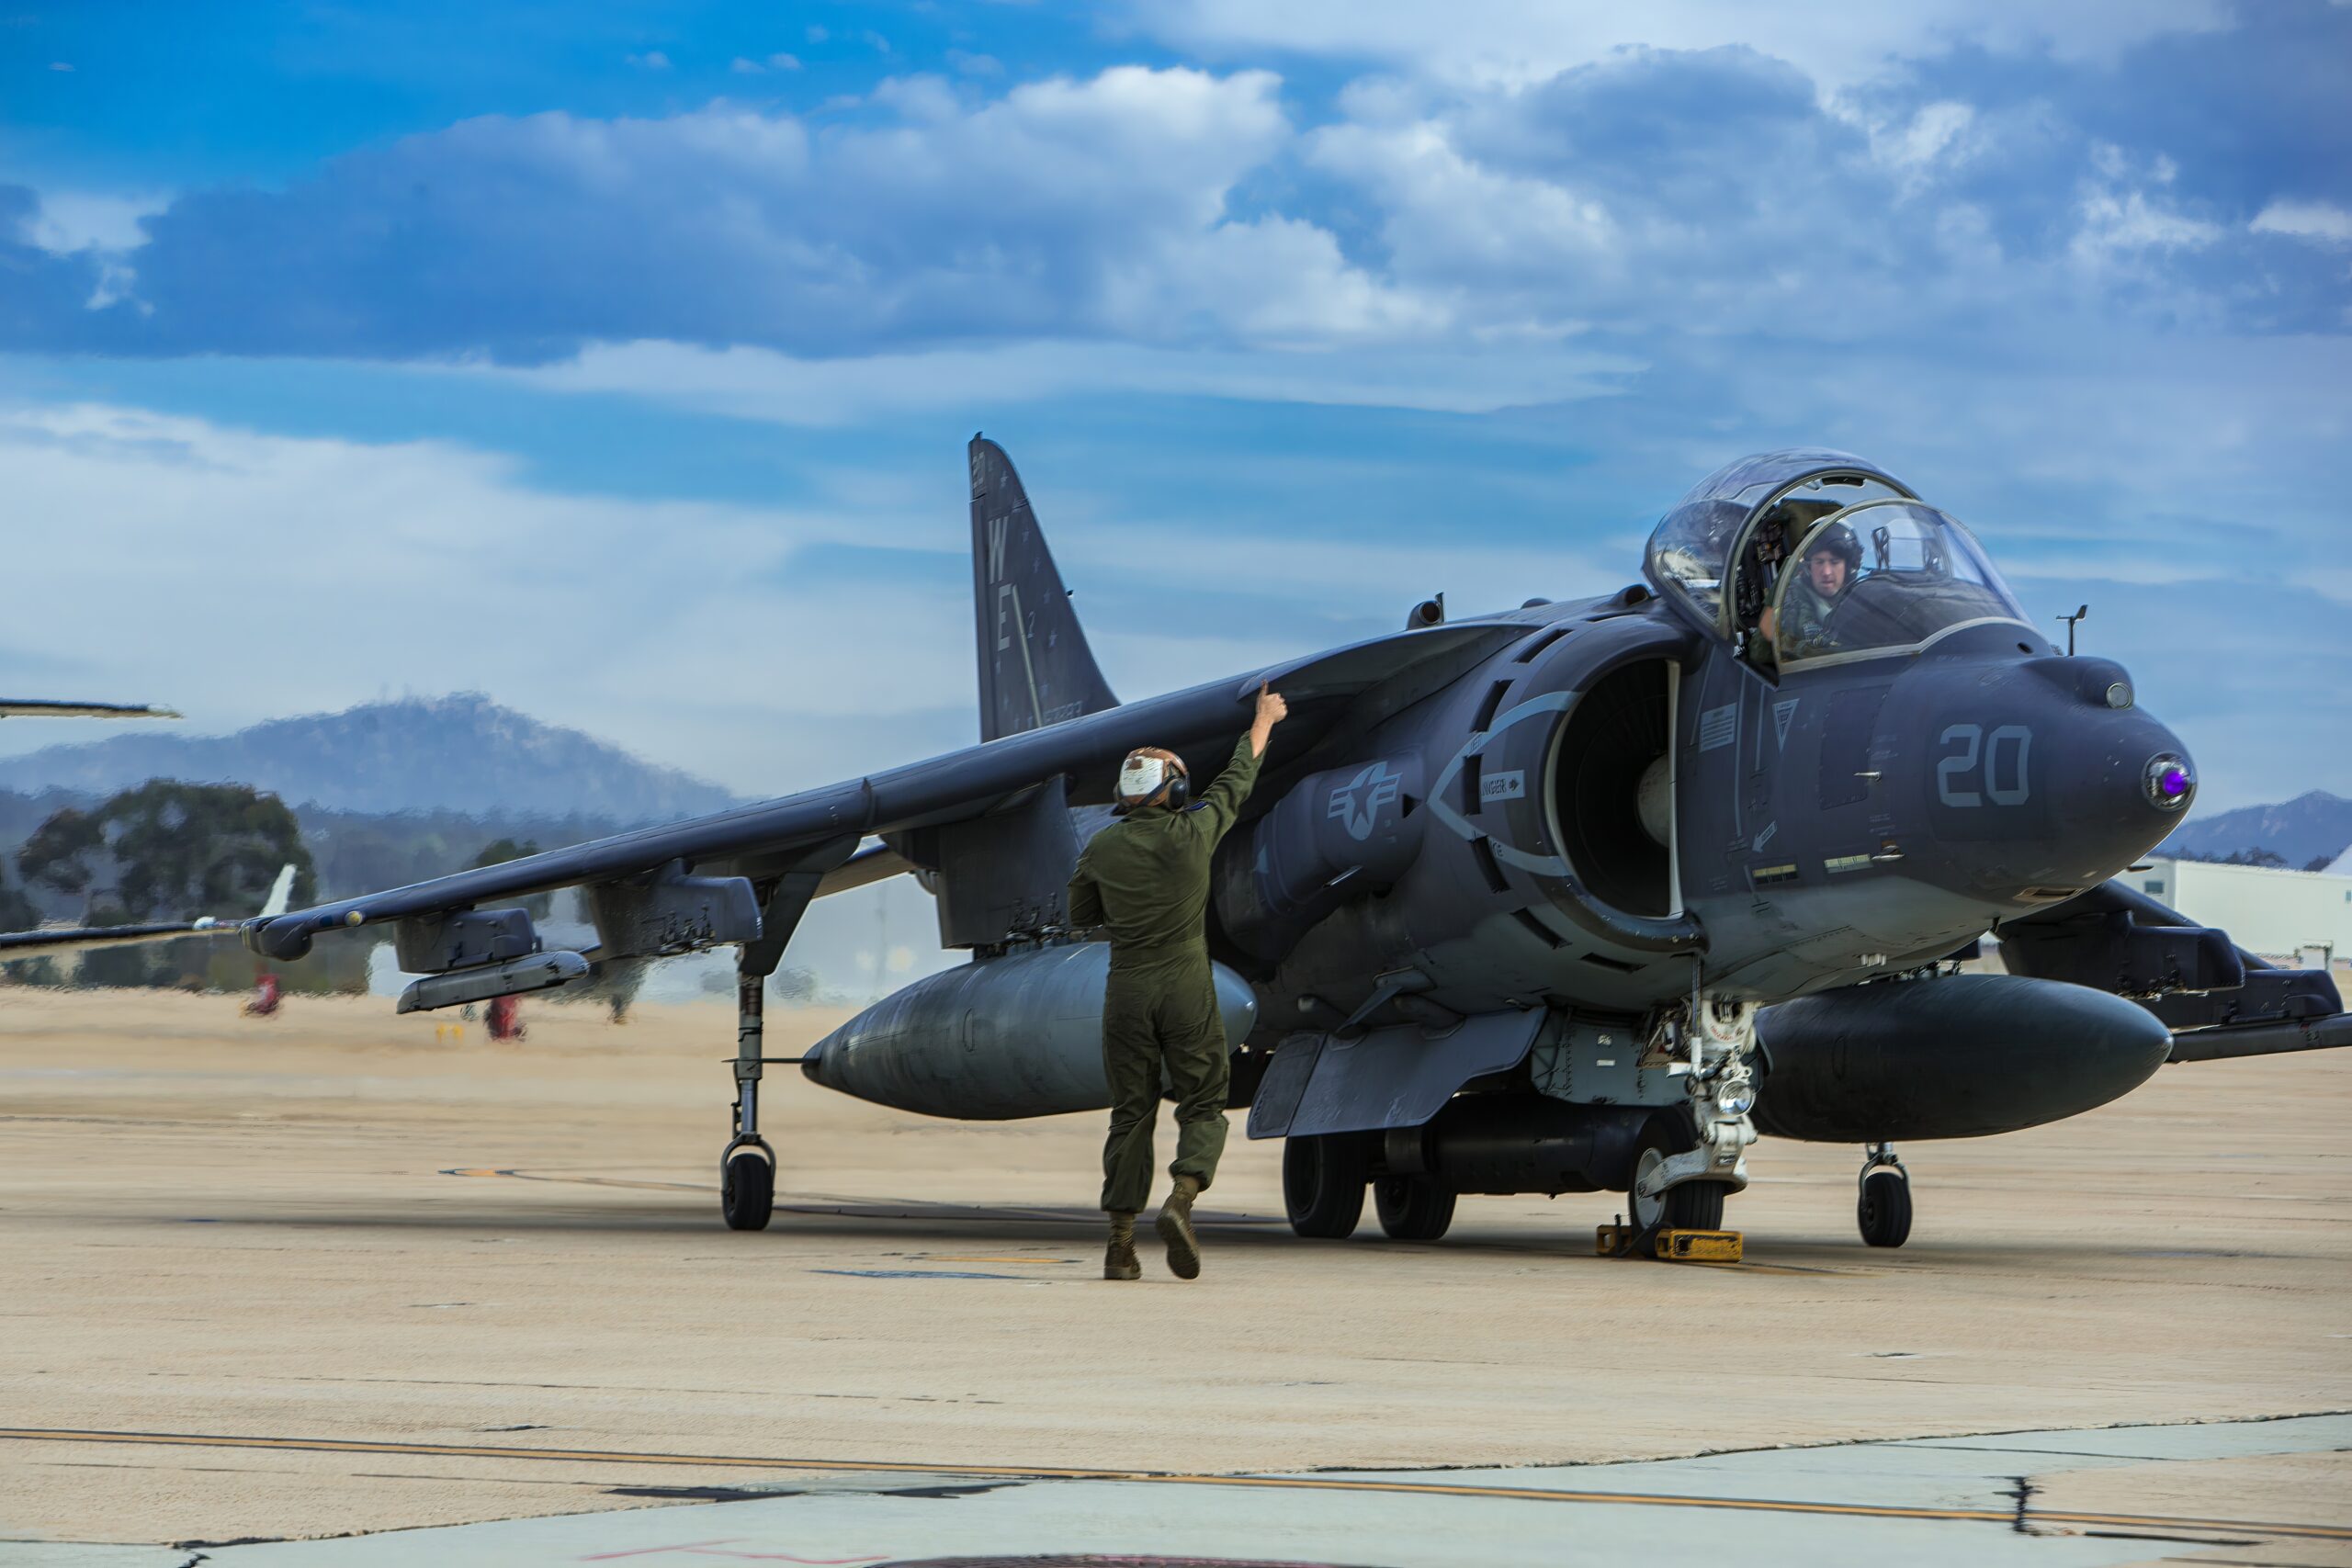 Marines with Marine Attack Squadron (VMA) 214 remove ordnance from an AV-8B Harrier II at Marine Corps Air Station Miramar, Calif.